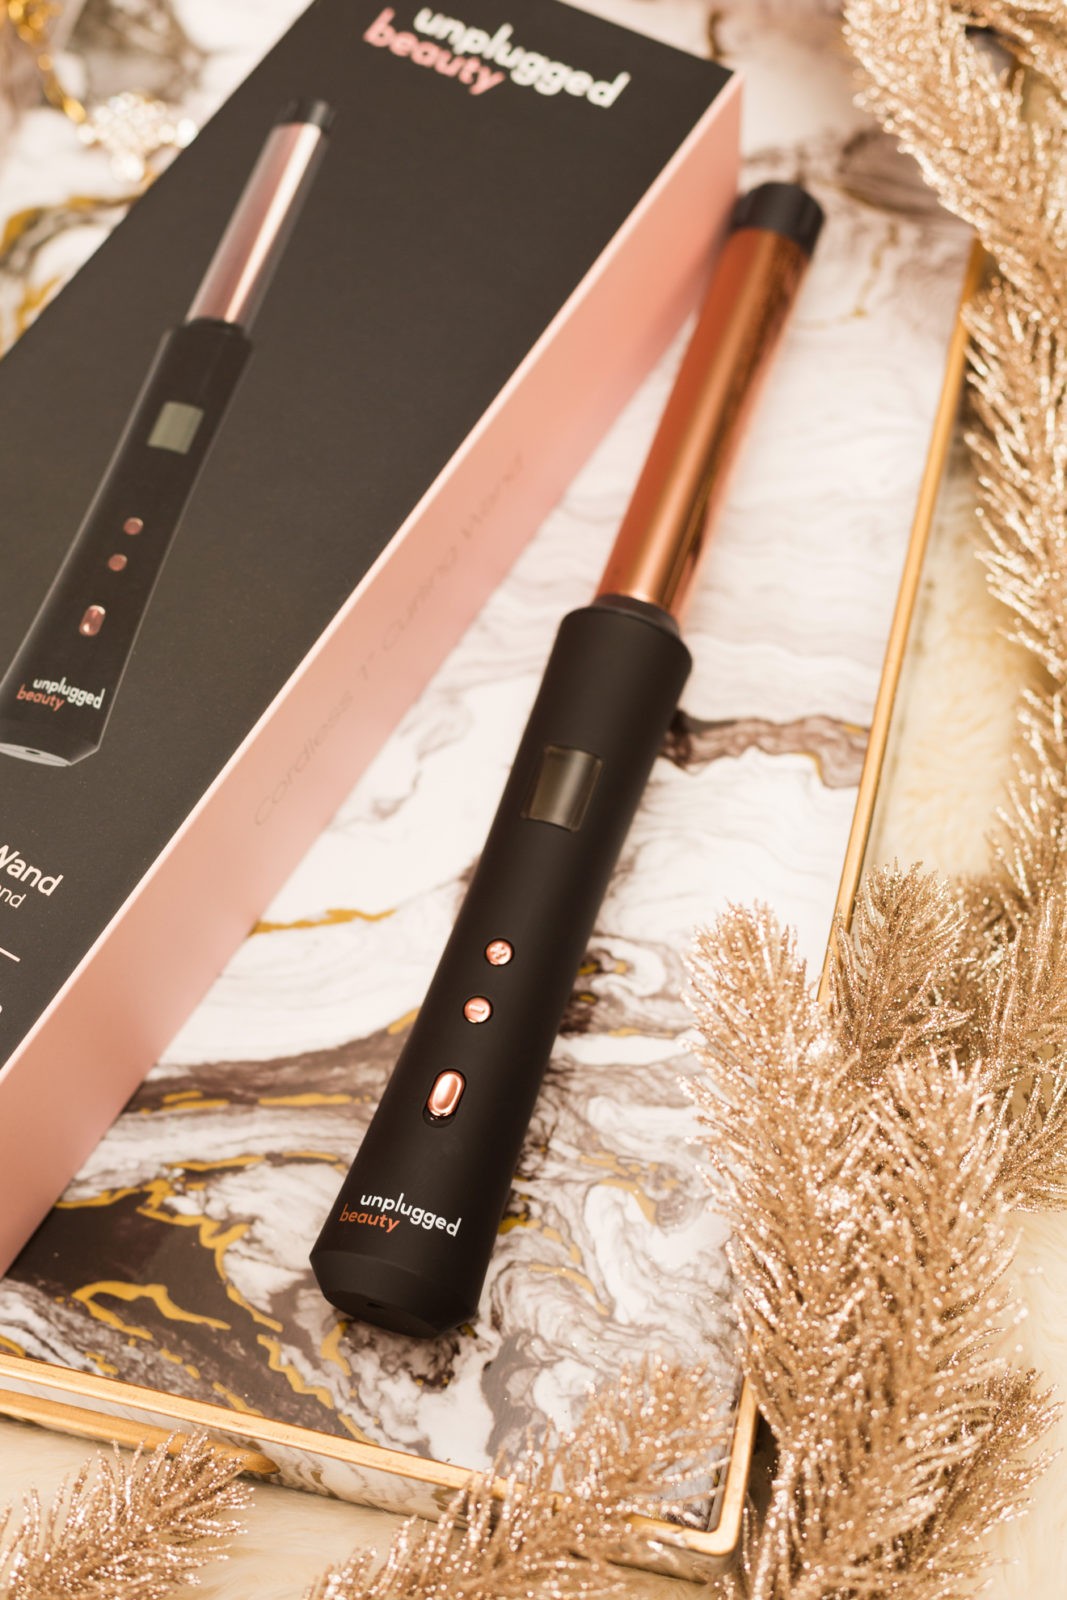 Gift Ideas for the Woman Who Has Everything by Lifestyle Blogger Laura Lily, Unplugged Beauty Cordless Curling Want, Luxurious Gift Ideas for Her | Gift Ideas for the Woman Who Has Everything by popular Los Angeles life and style blogger, Laura Lily: image of a Unplugged Beauty cordless curling wand.